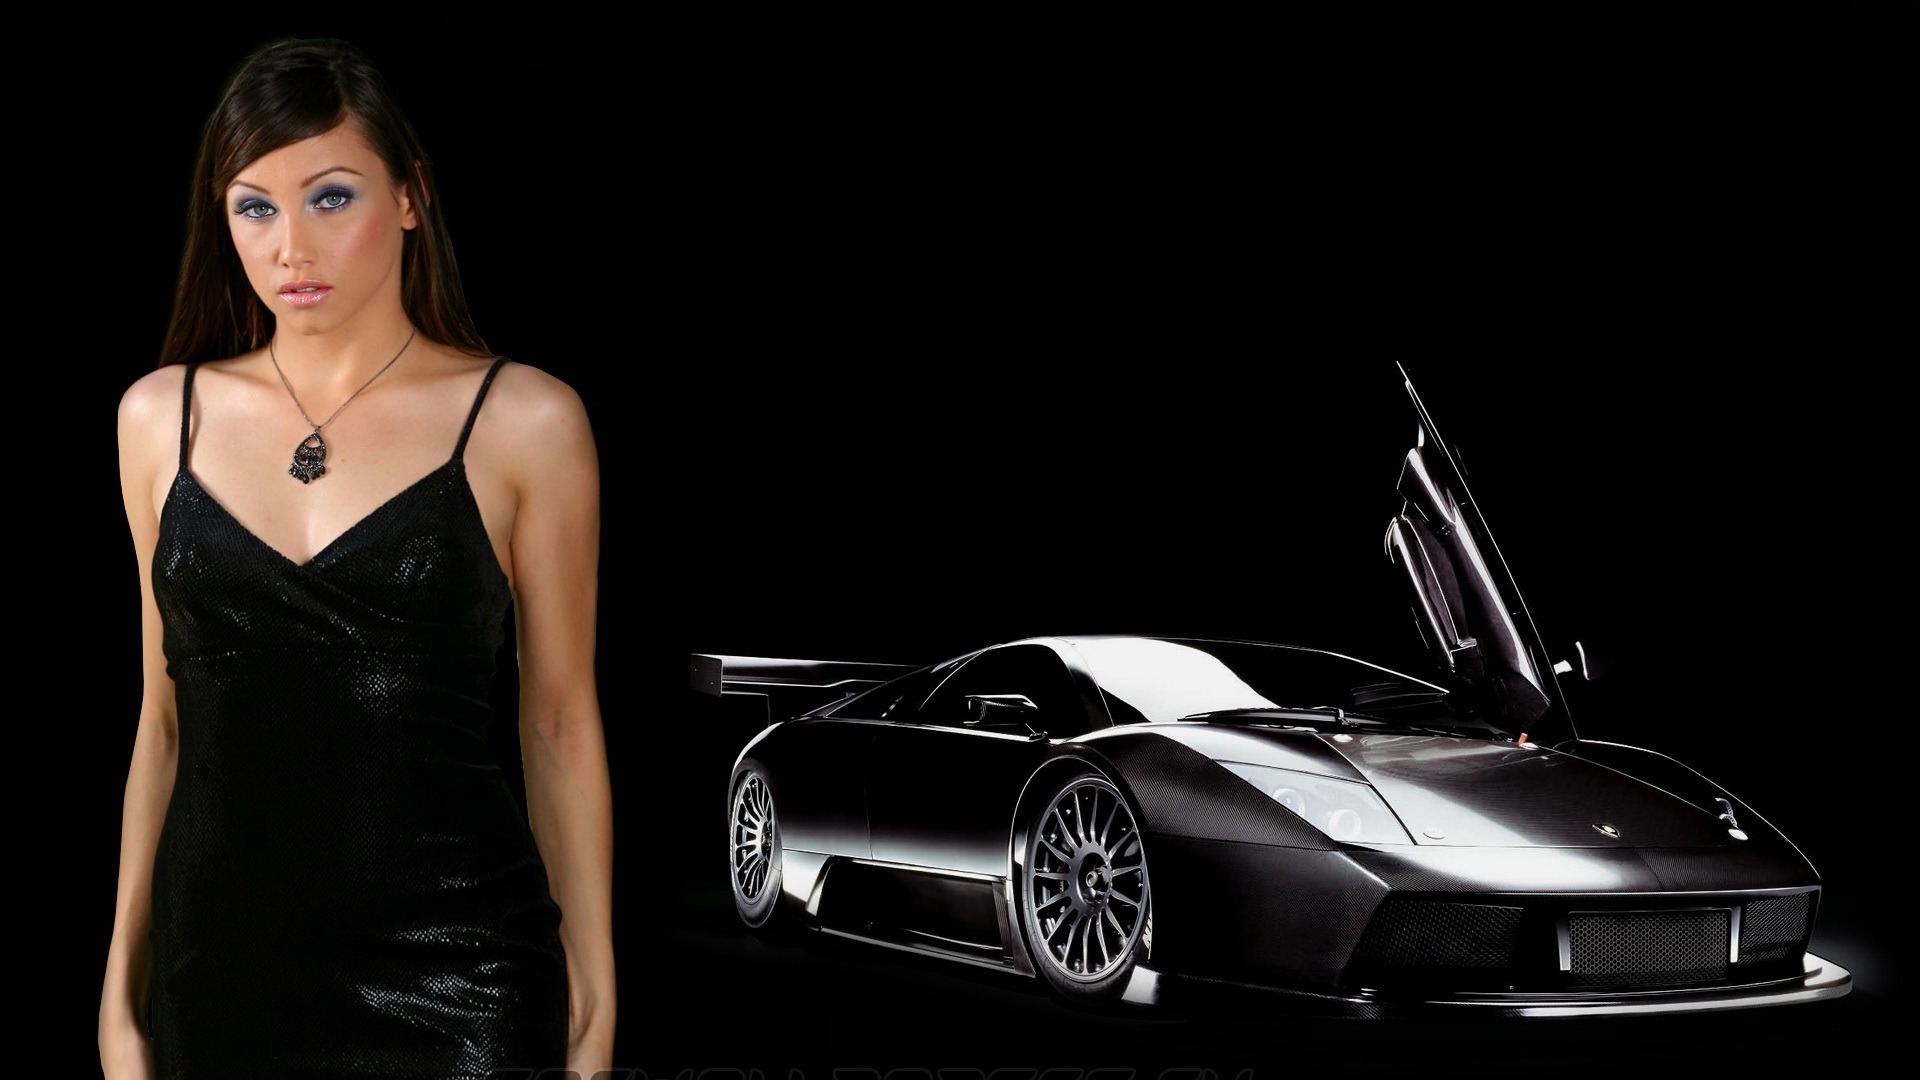 Cars and Girls wallpapers (2) #3 - 1920x1080